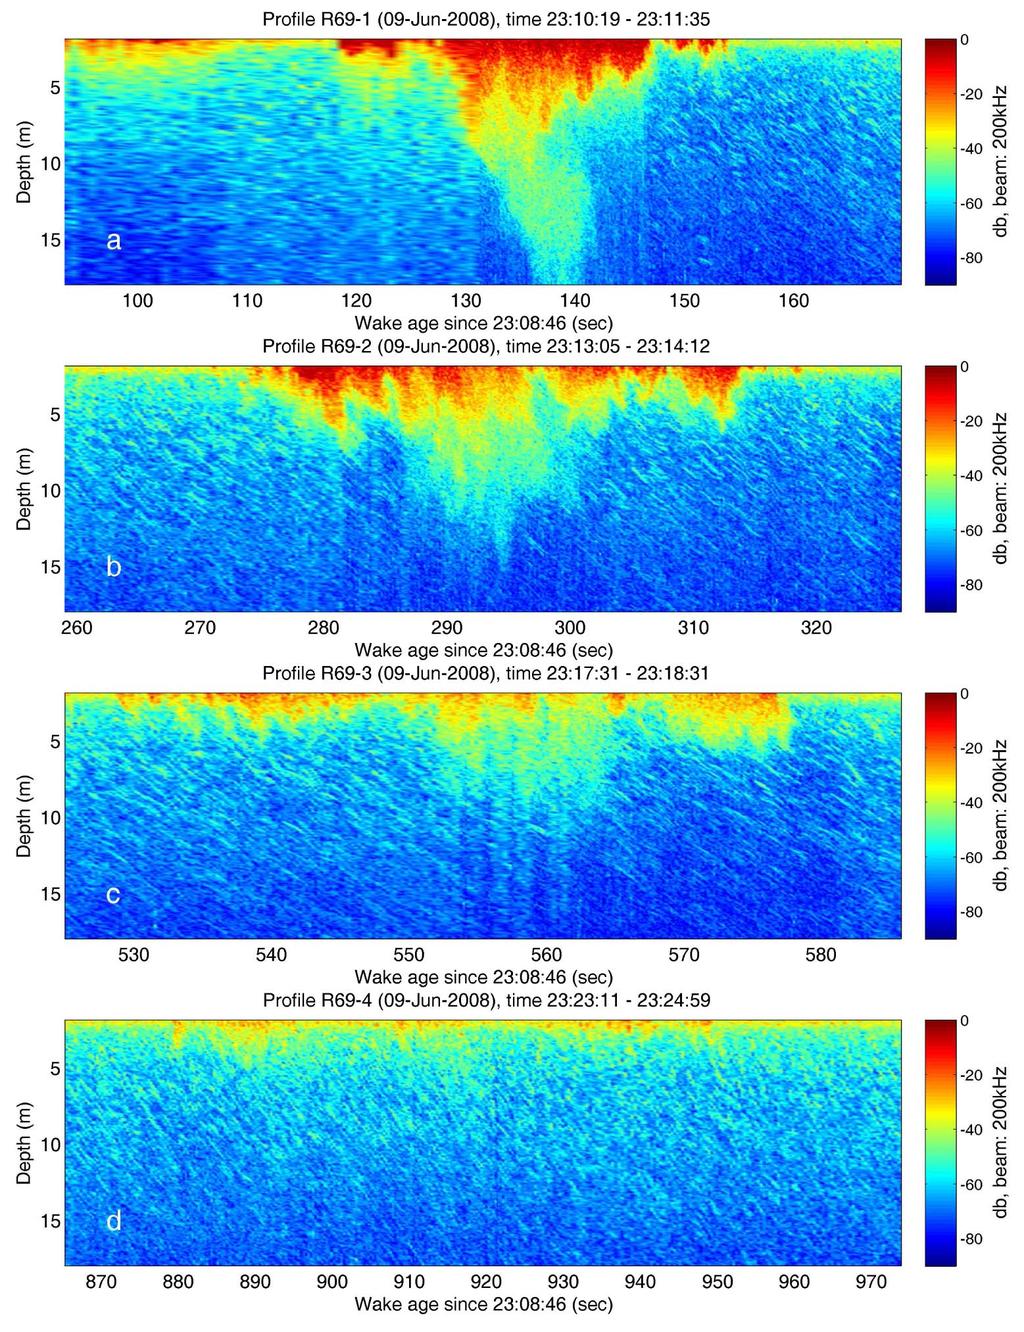 846 IEEE TRANSACTIONS ON GEOSCIENCE AND REMOTE SENSING, VOL. 48, NO. 2, FEBRUARY 2010 Fig. 6. Four crossings of the wake of a moving ship on June 9, 2008.